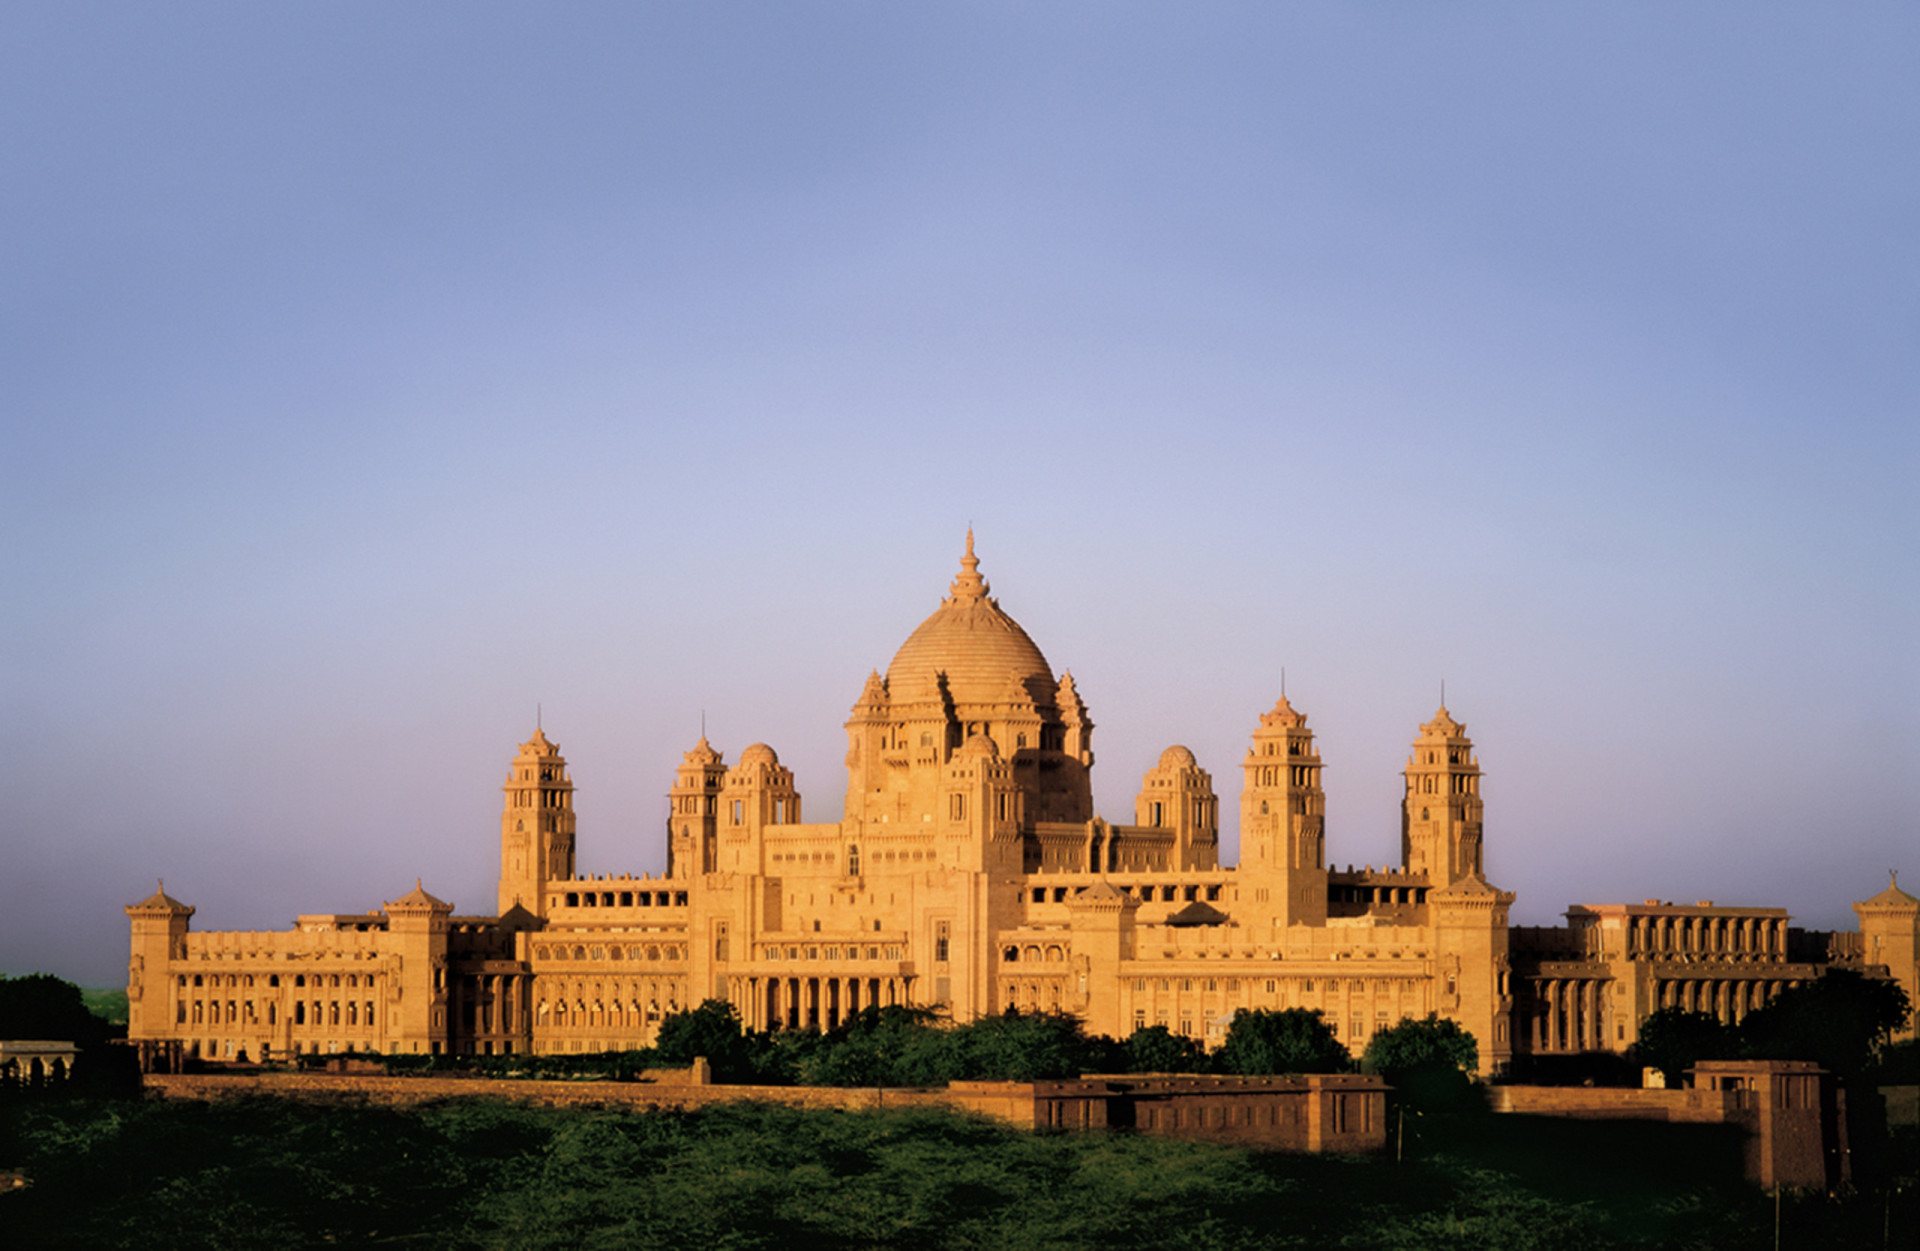 <p>This tour, titled the King of the Castle, takes you on a visit to the most lavish Indian palaces, including Lake, Umaid Bhawan (pictured), and Rambagh. Visitors enjoy a three-night stay at each of the palaces for US$1.67 million per person!</p>